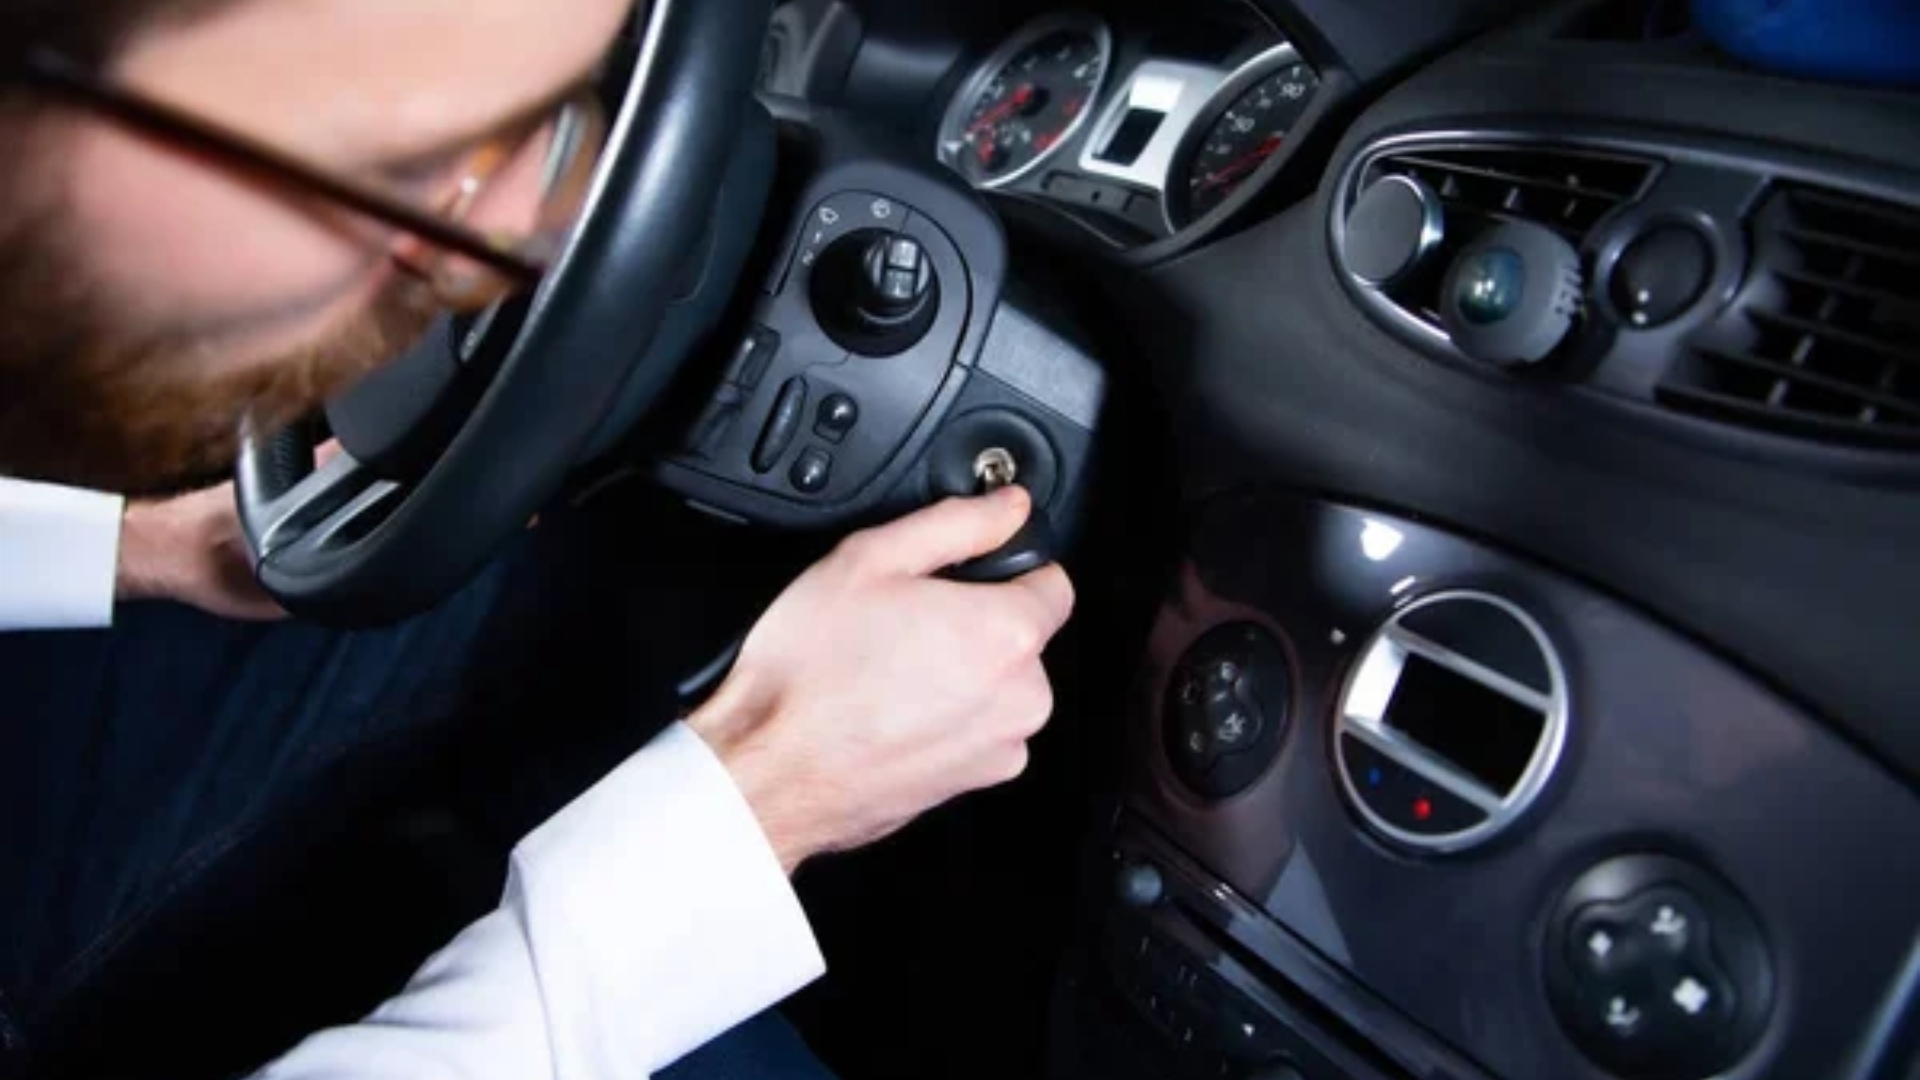 A driver turning the ignition switch on